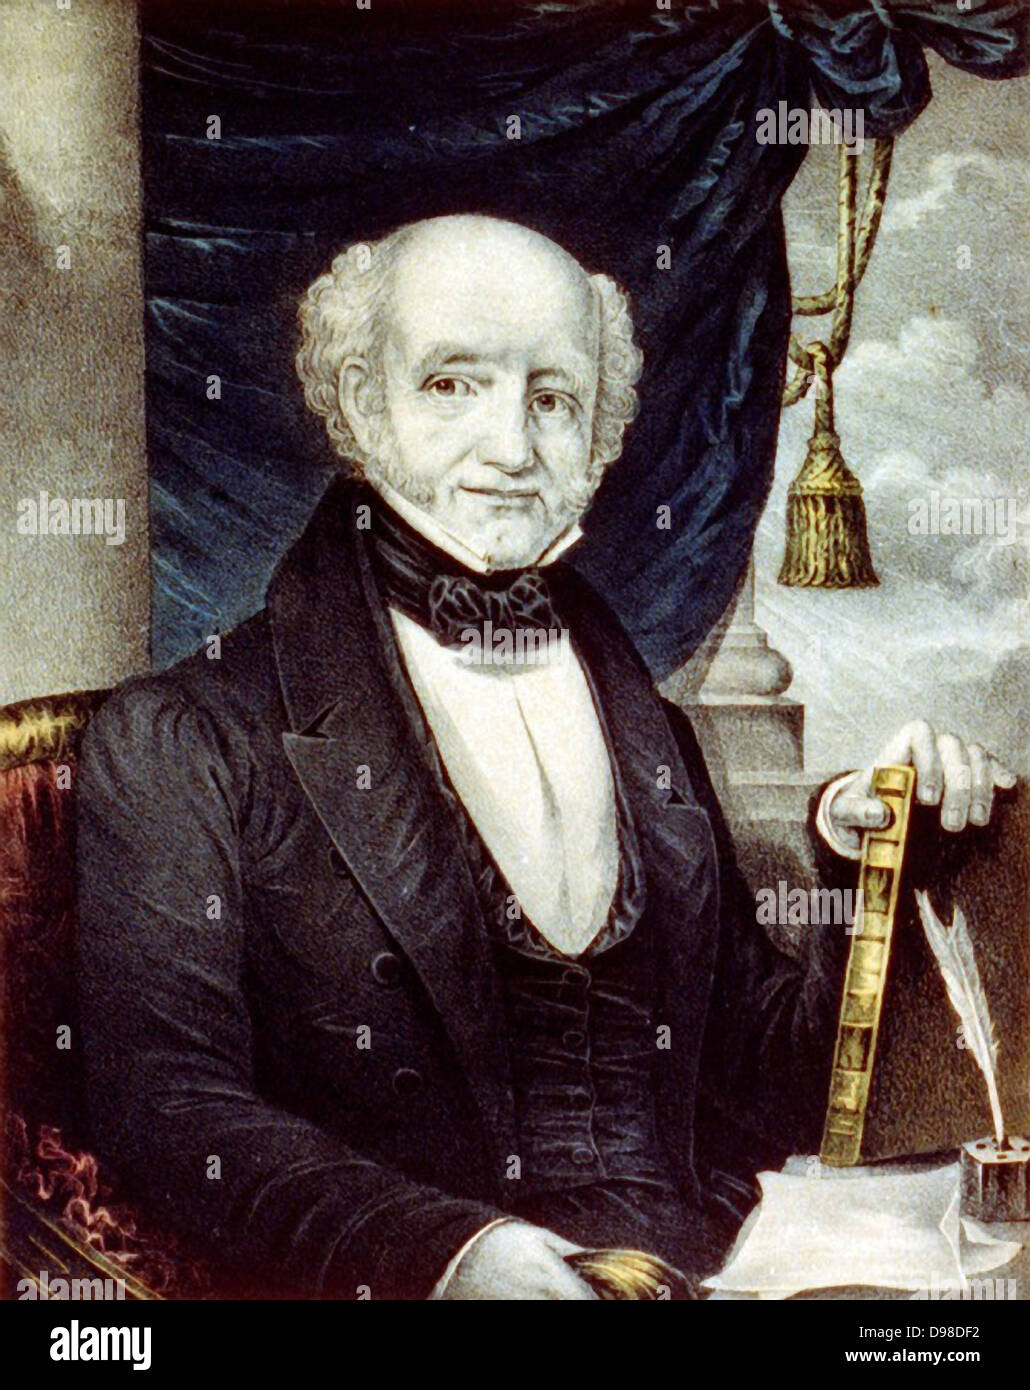 Martin Van Buren (1782-1862) Eighth President of the United States of America (1837-1841), the first President to be born an American citizen. Currier & Ives lithograph portrait of Van Buren seated at desk holding a leather-bound book. Stock Photo